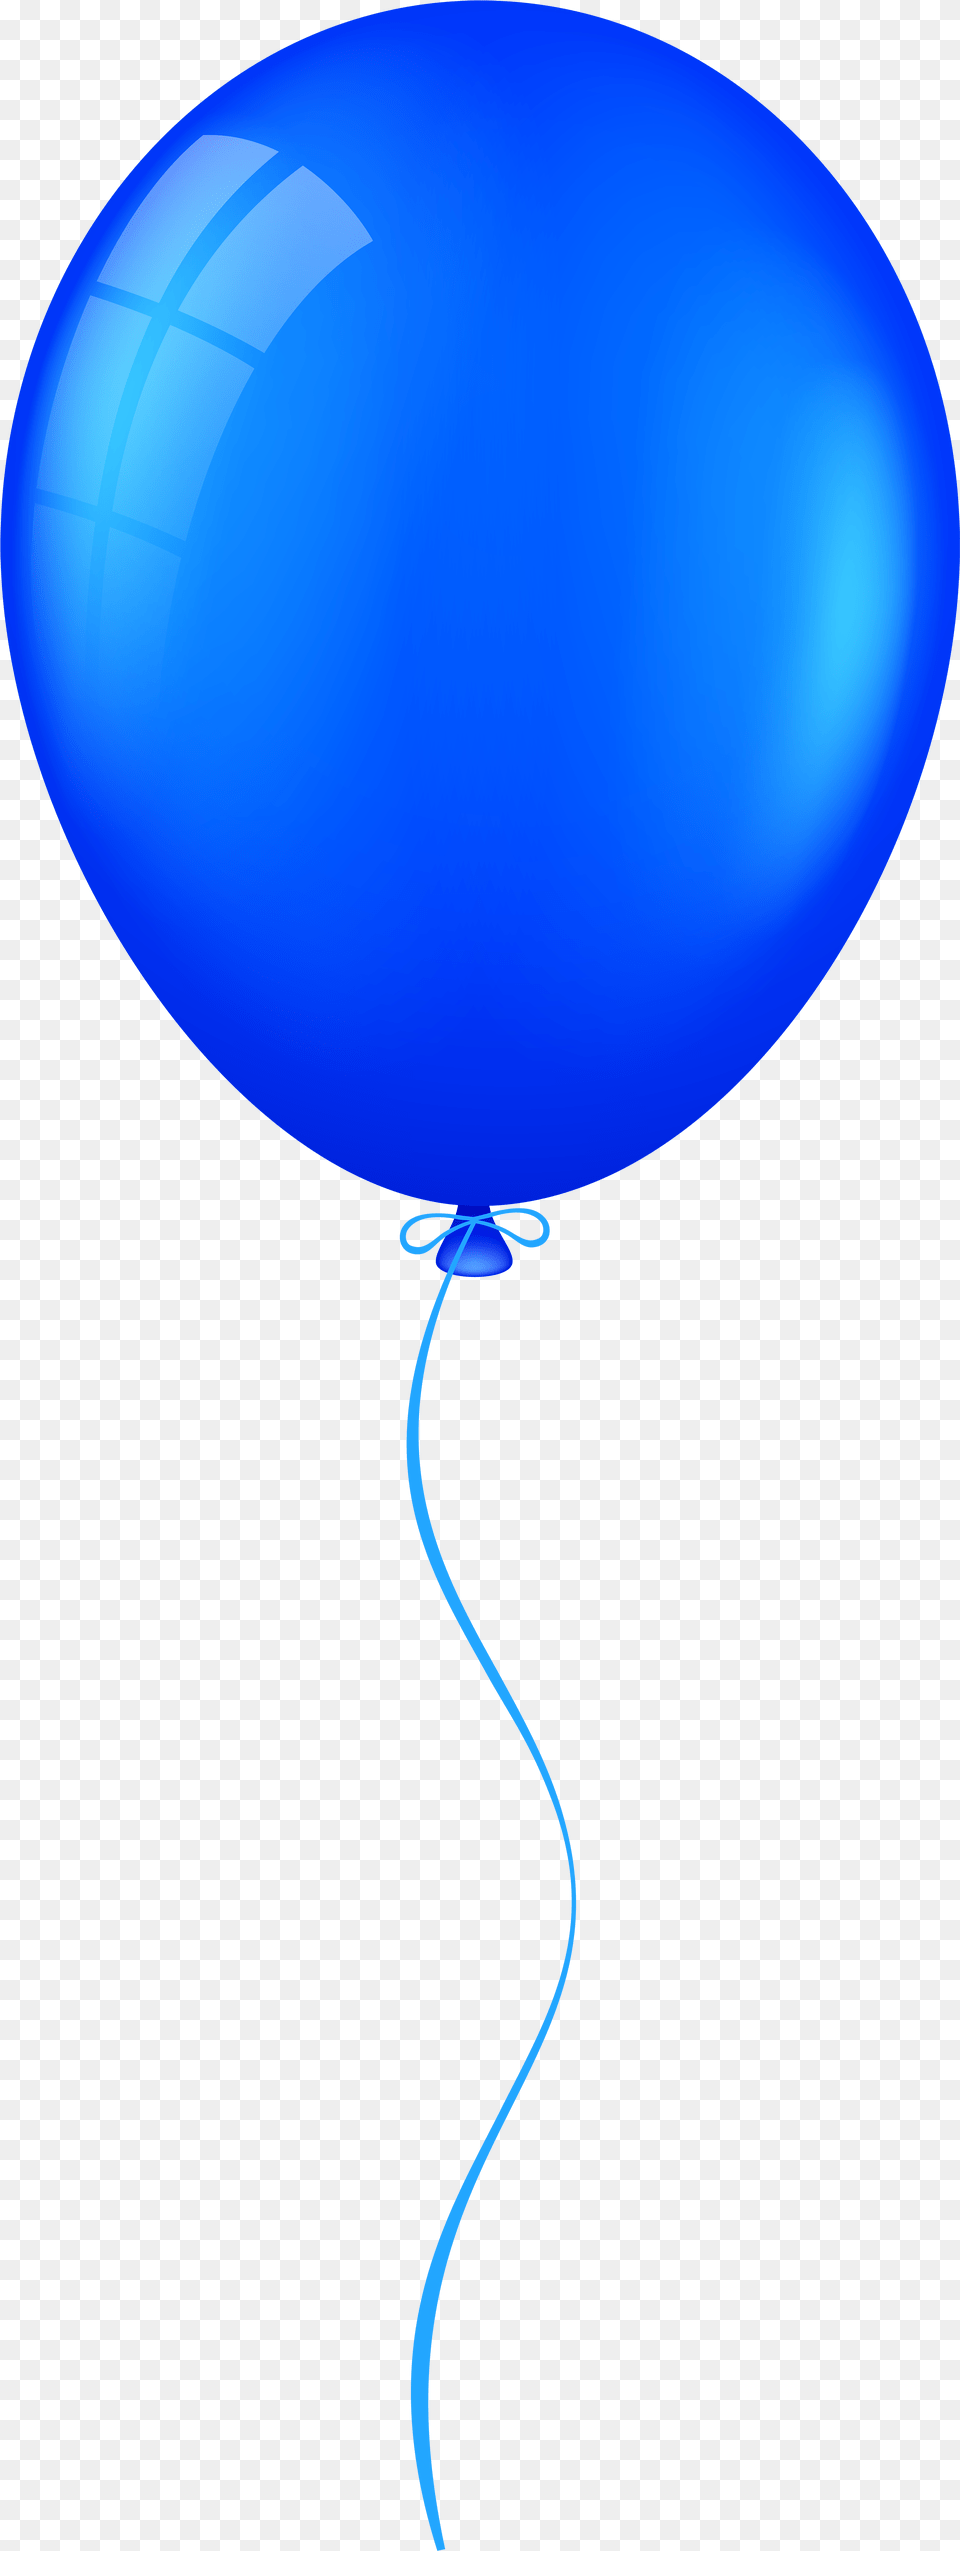 Balloon Transparent Blue Cartoon Balloon Transparent Background, Astronomy, Moon, Nature, Night Free Png Download